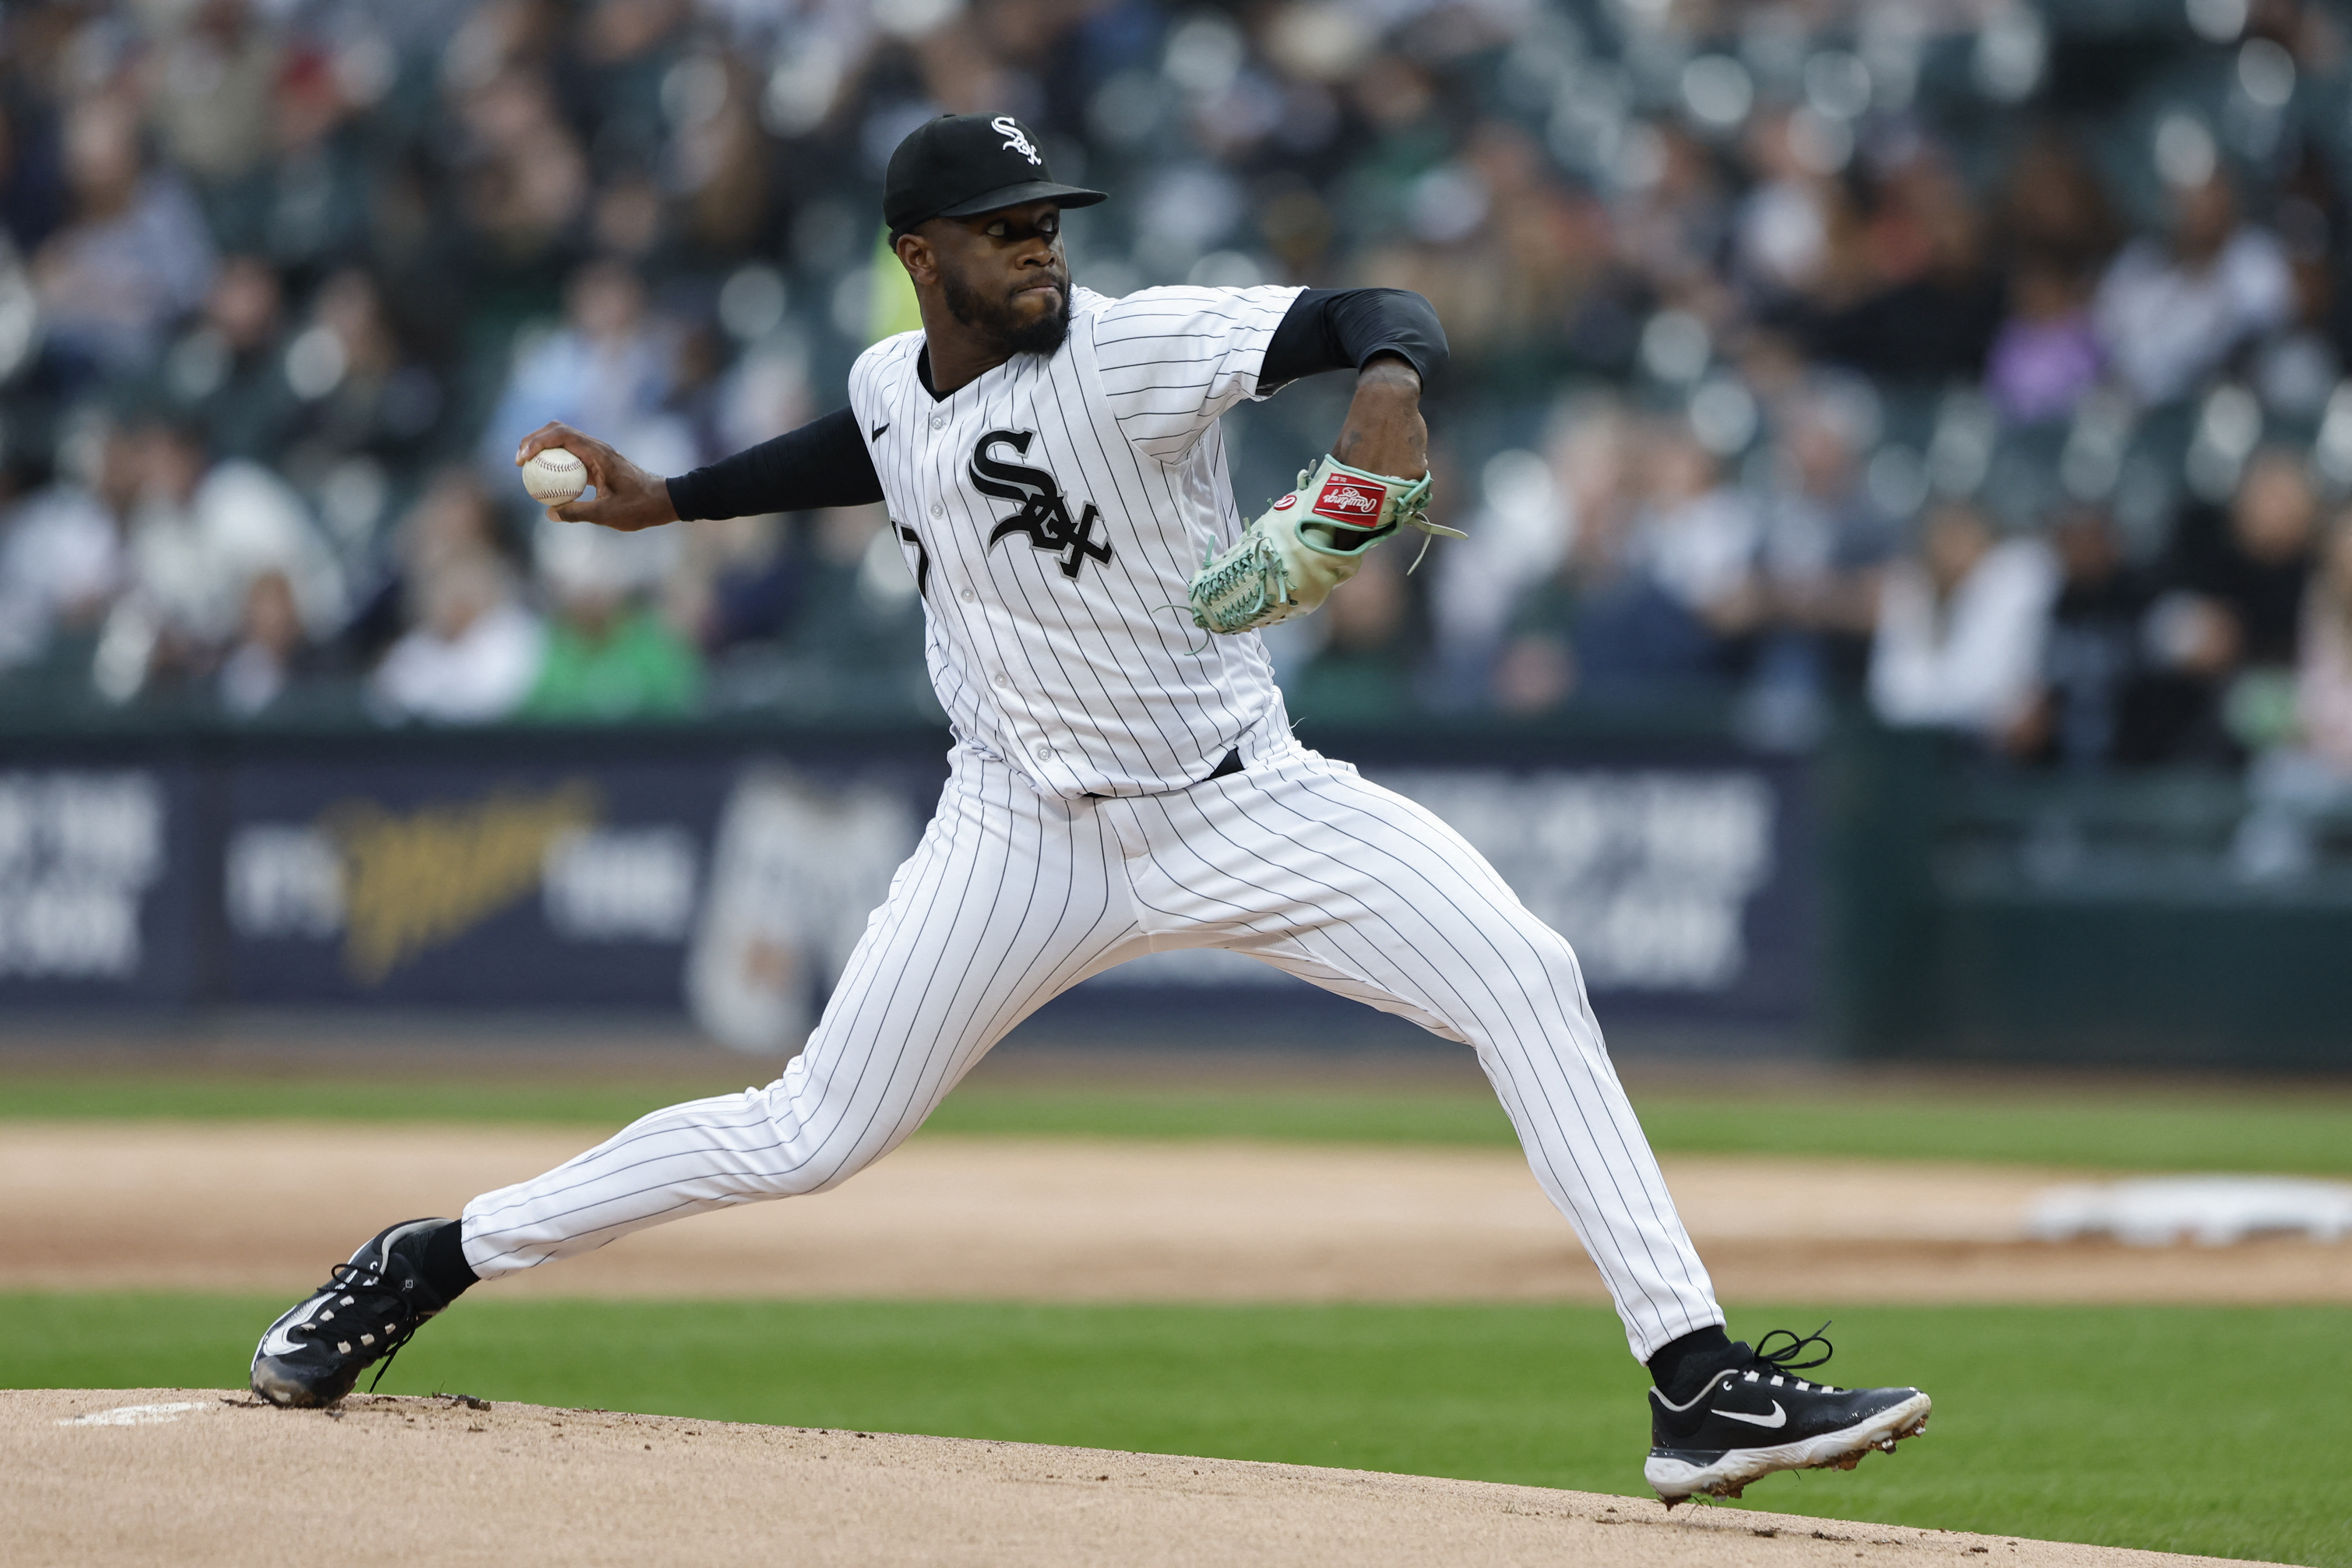 White Sox blast early home runs, hang on to beat Twins 7-6